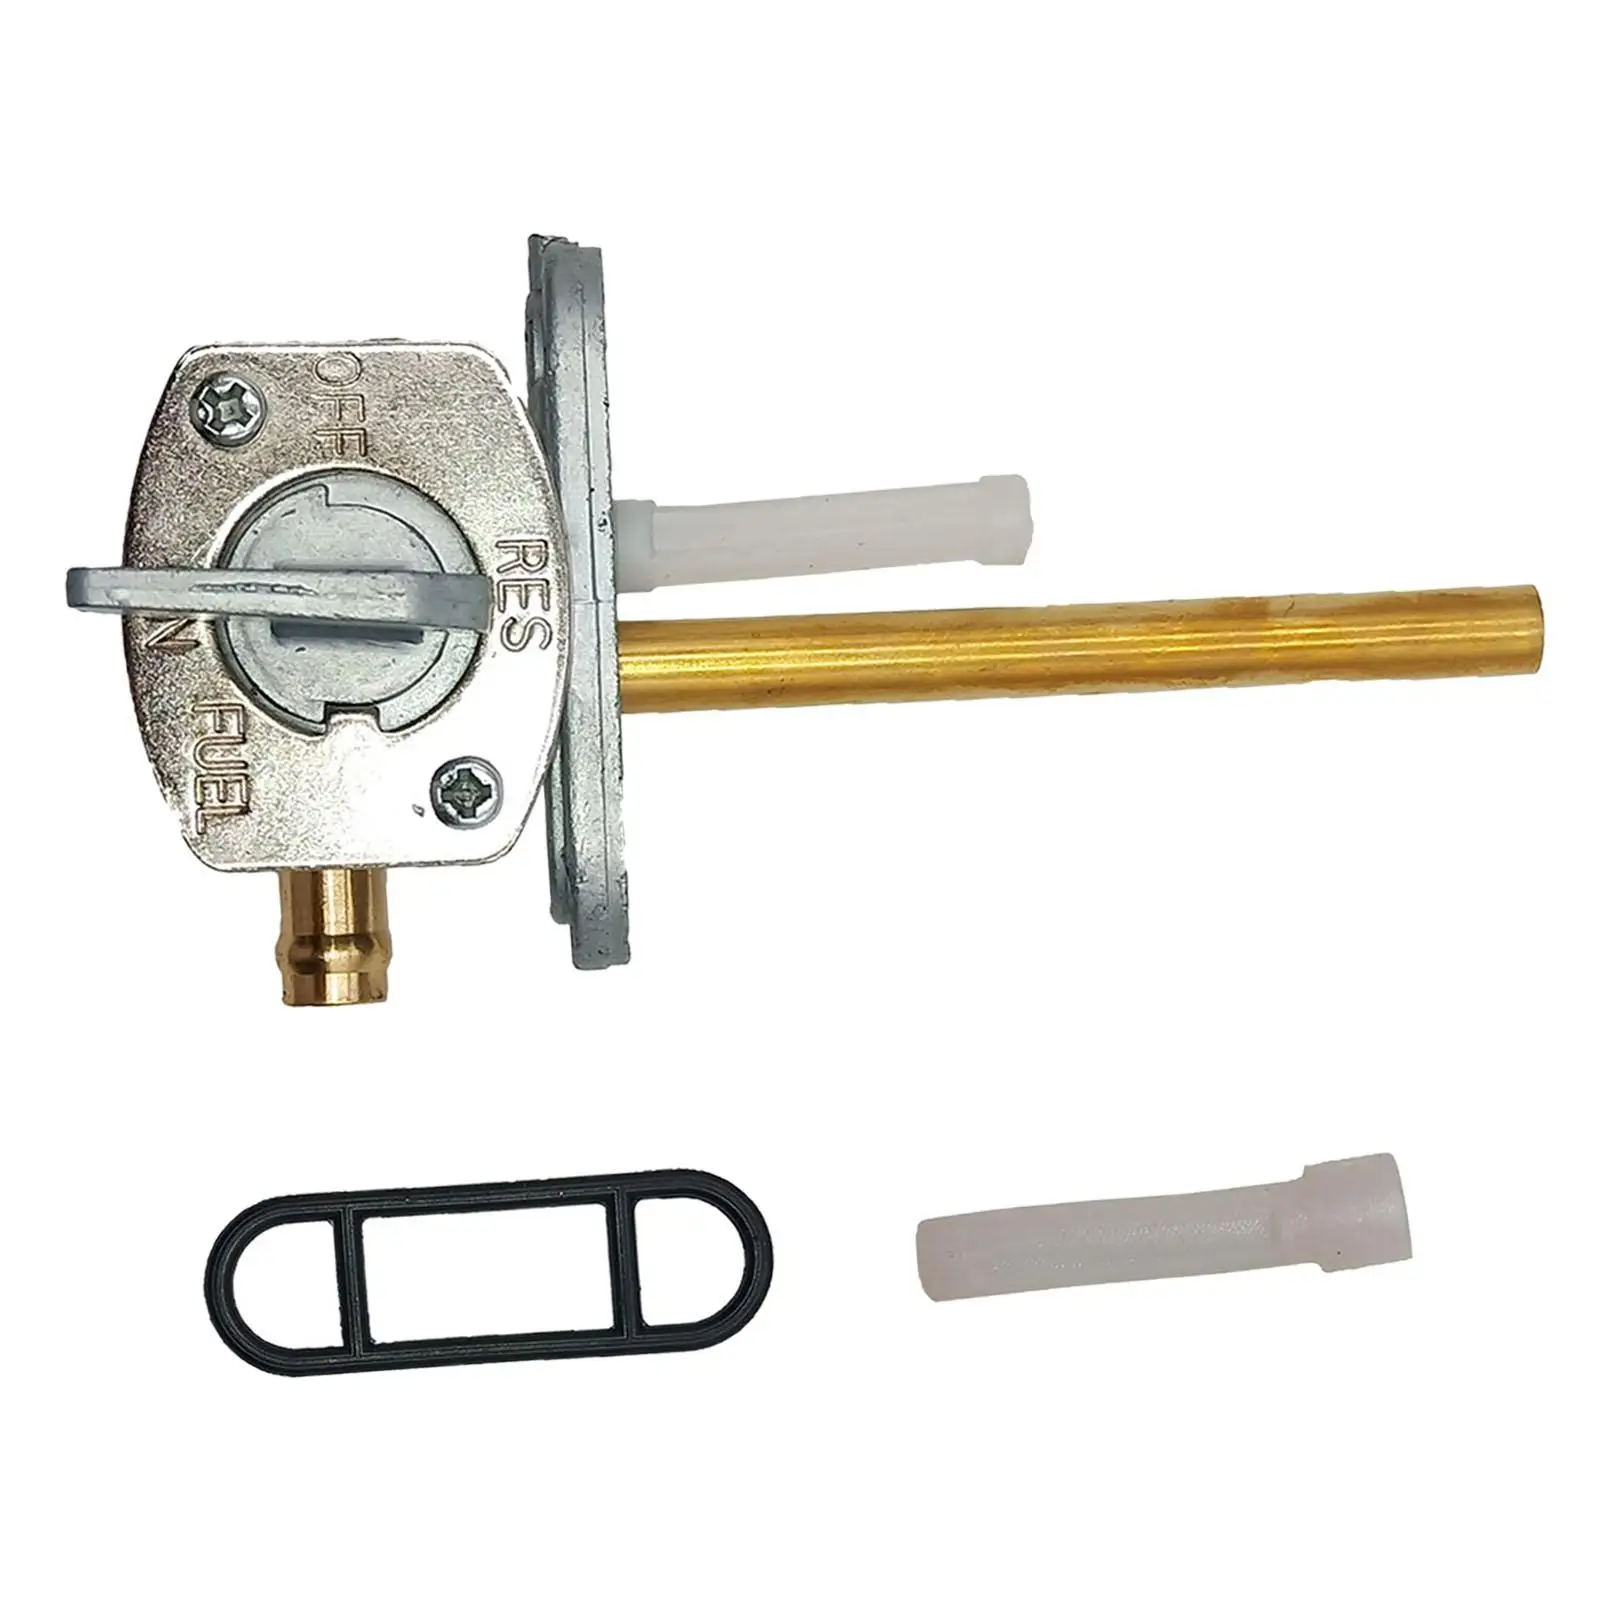 Replace 2Gu-24500-02 Fuel Valve Petcock Replacement for 300 stable characteristics, high reliability